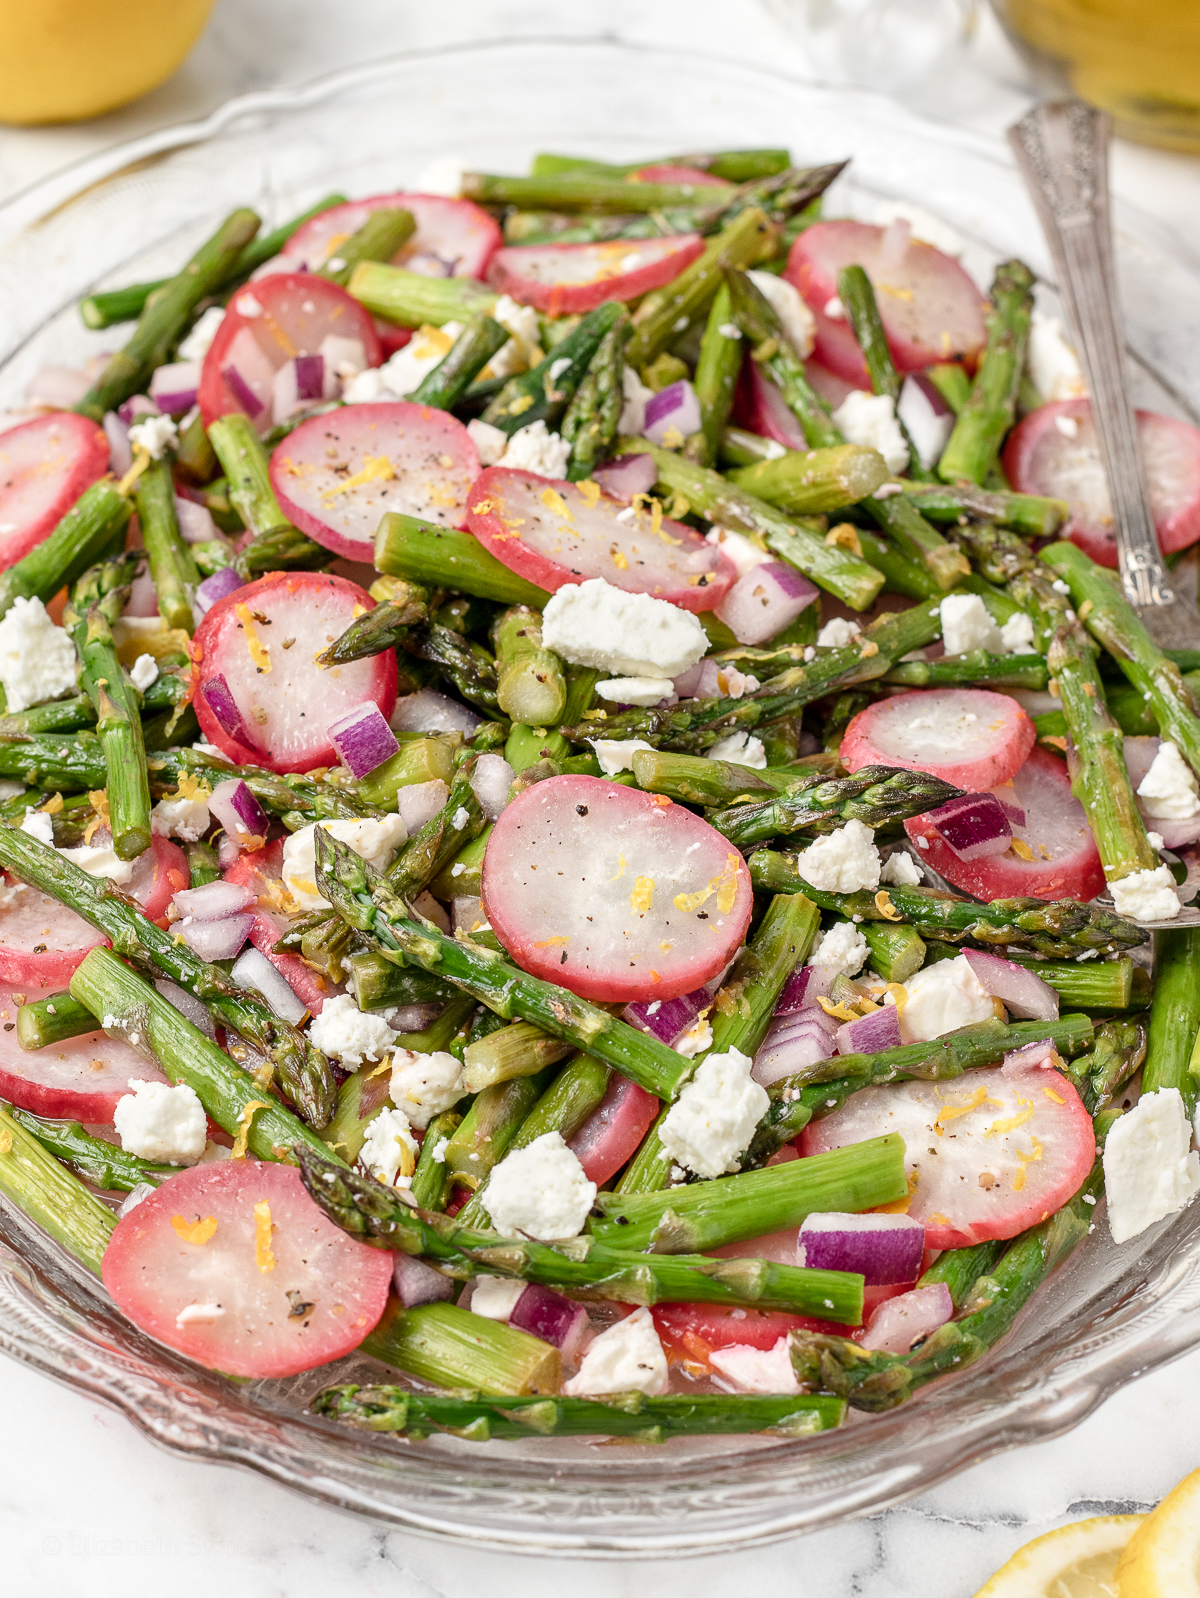 Platter of roasted radishes and asparagus topped with red onion, and feta cheese tossed in lemon juice and lemon zest.